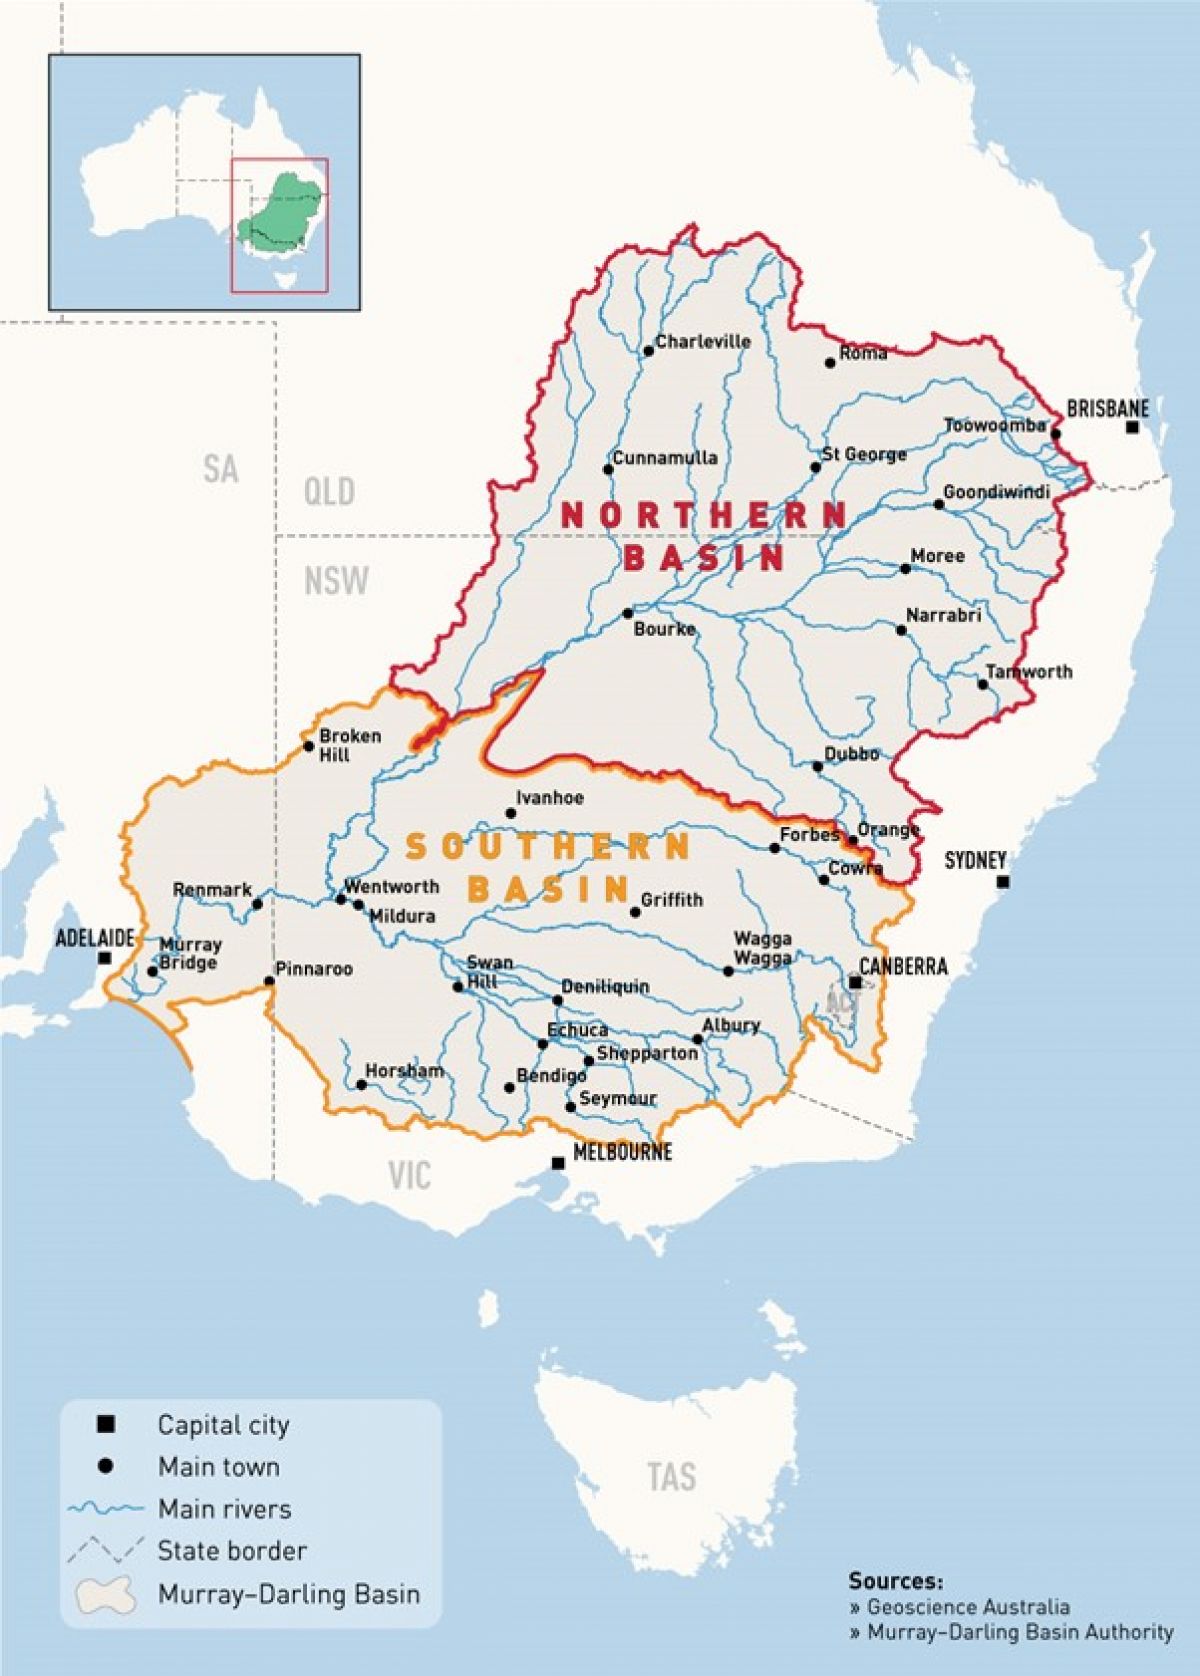 Map of the Murray Darling Basin, includes northern basin and souther basin. The basin is in Queensland, NSW, Victorian and South Australia